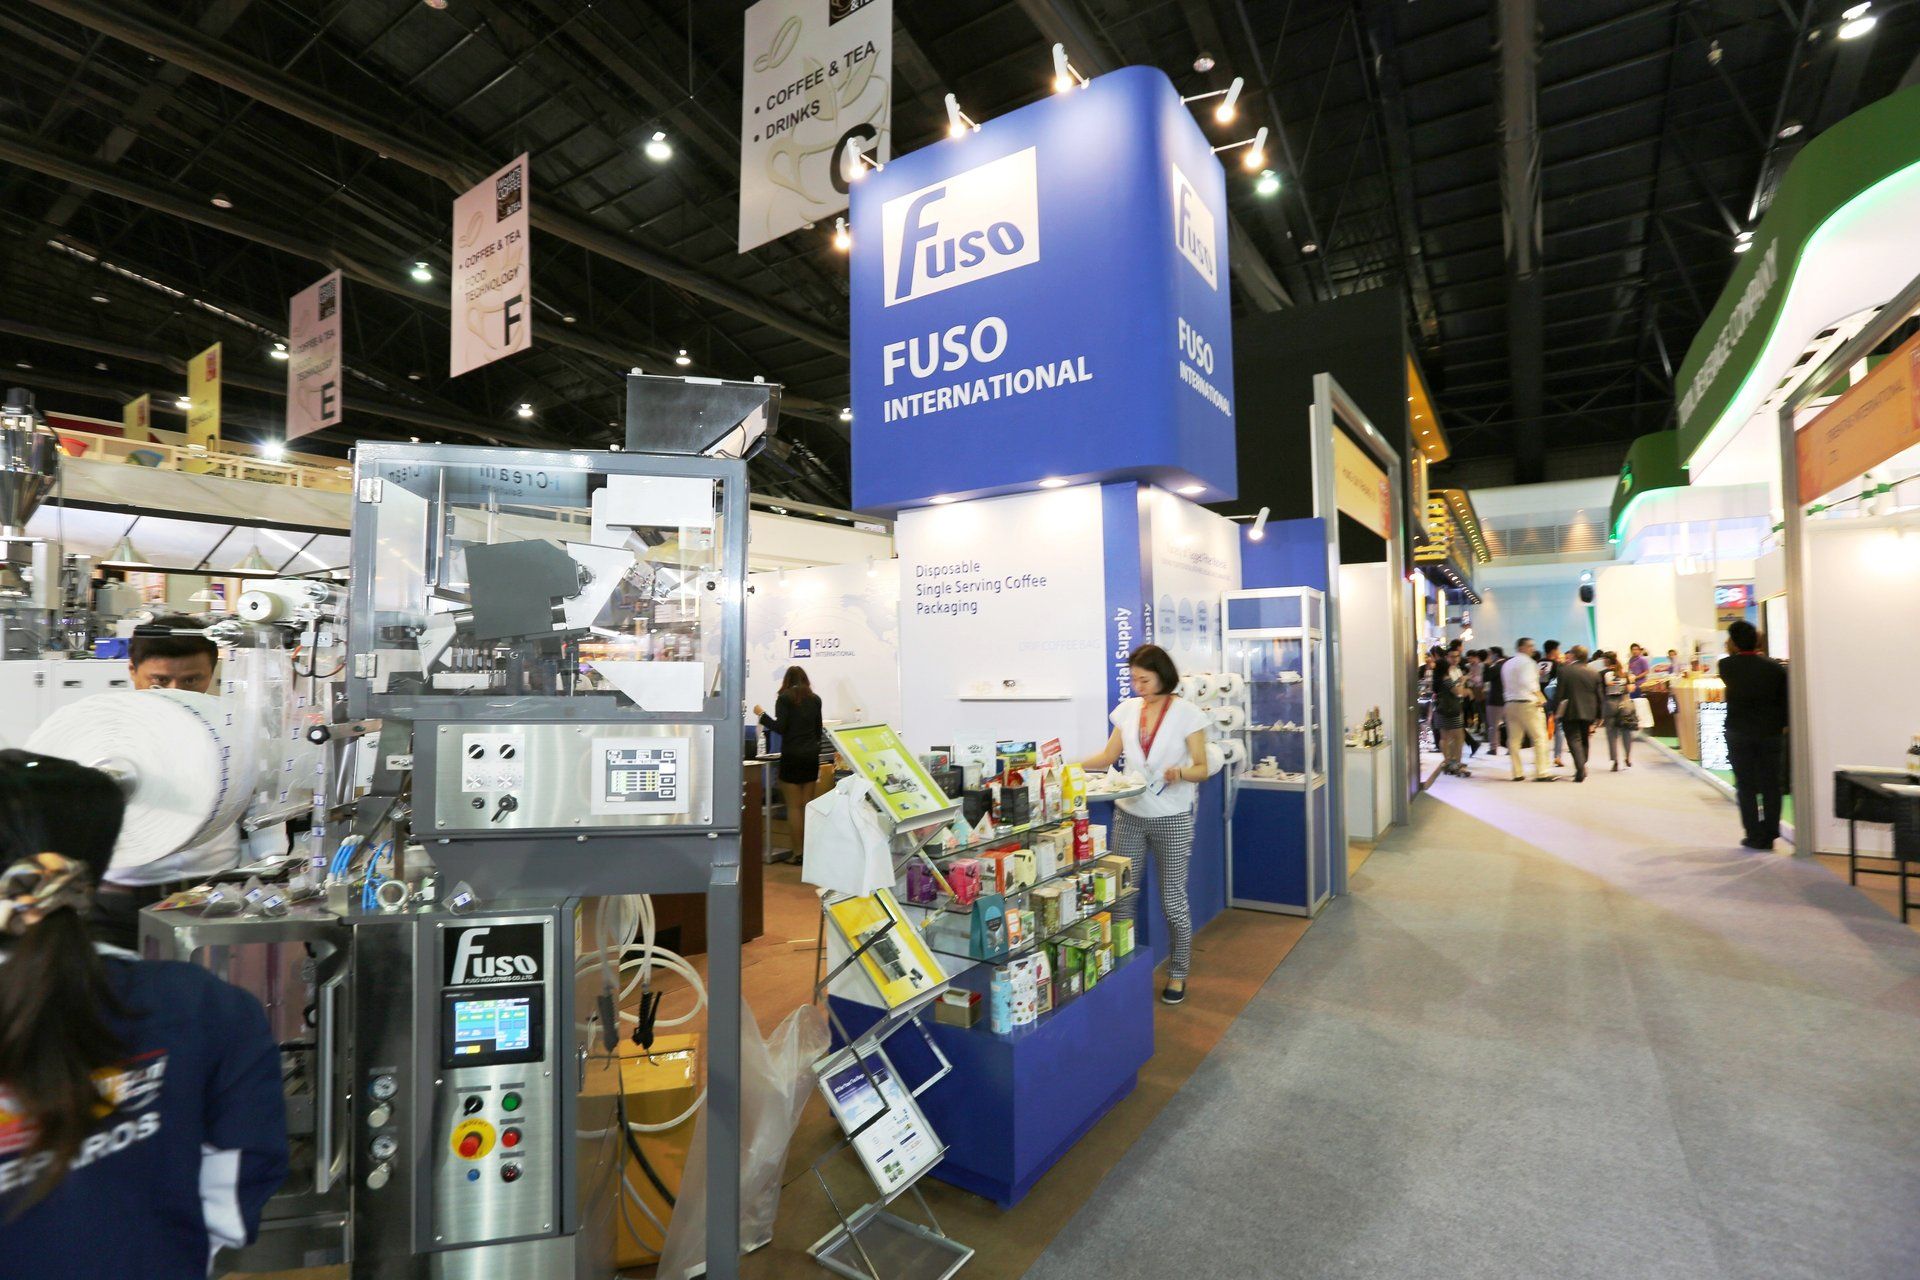 Fuso International @ Thaifex 2015. Booth designed and built by Essential Global Fairs.